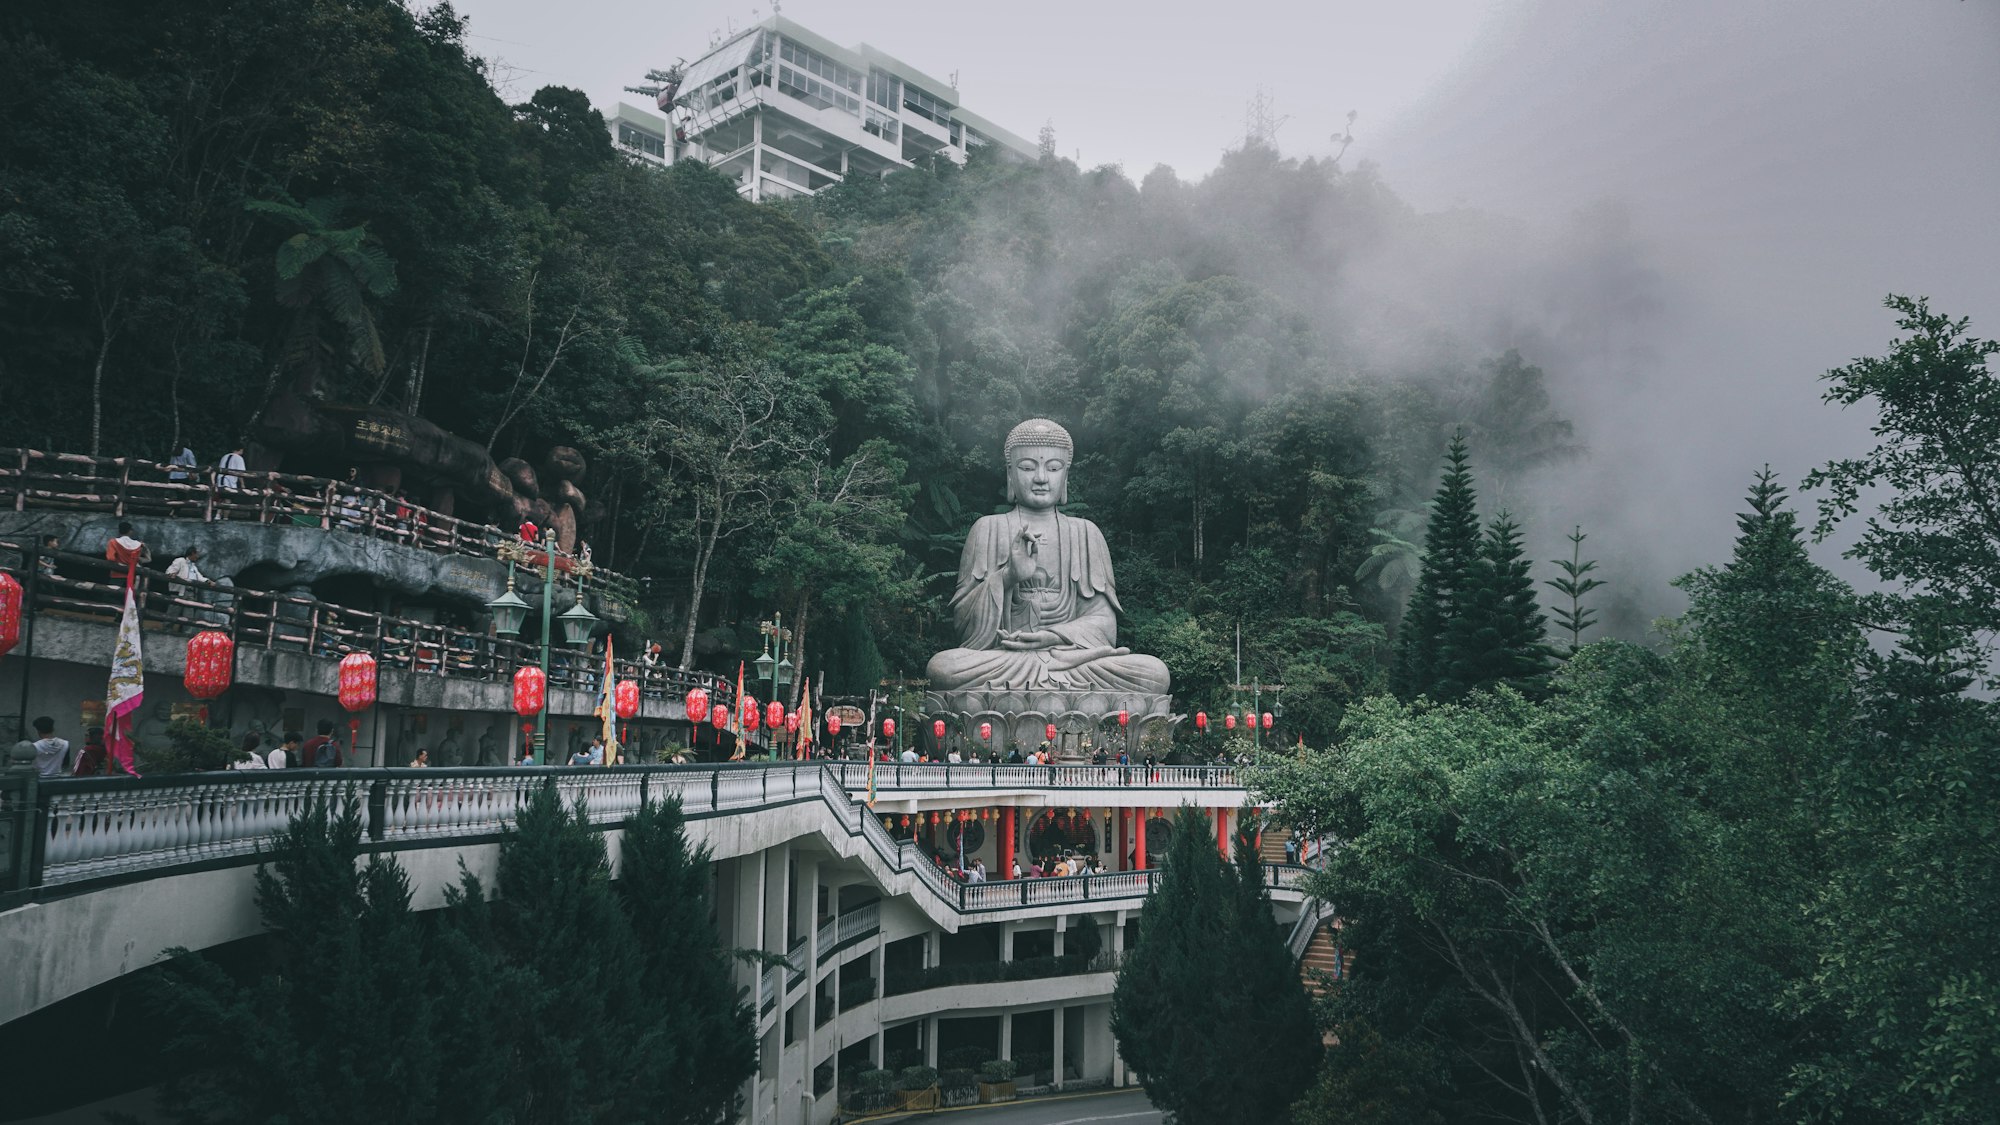 The Chin Swee Caves Temple is Chinese temple in Genting Highland, Pahang Malaysia. it is situated in the most scenic site of Genting Highlands. #photography #nature #religion #malaysia